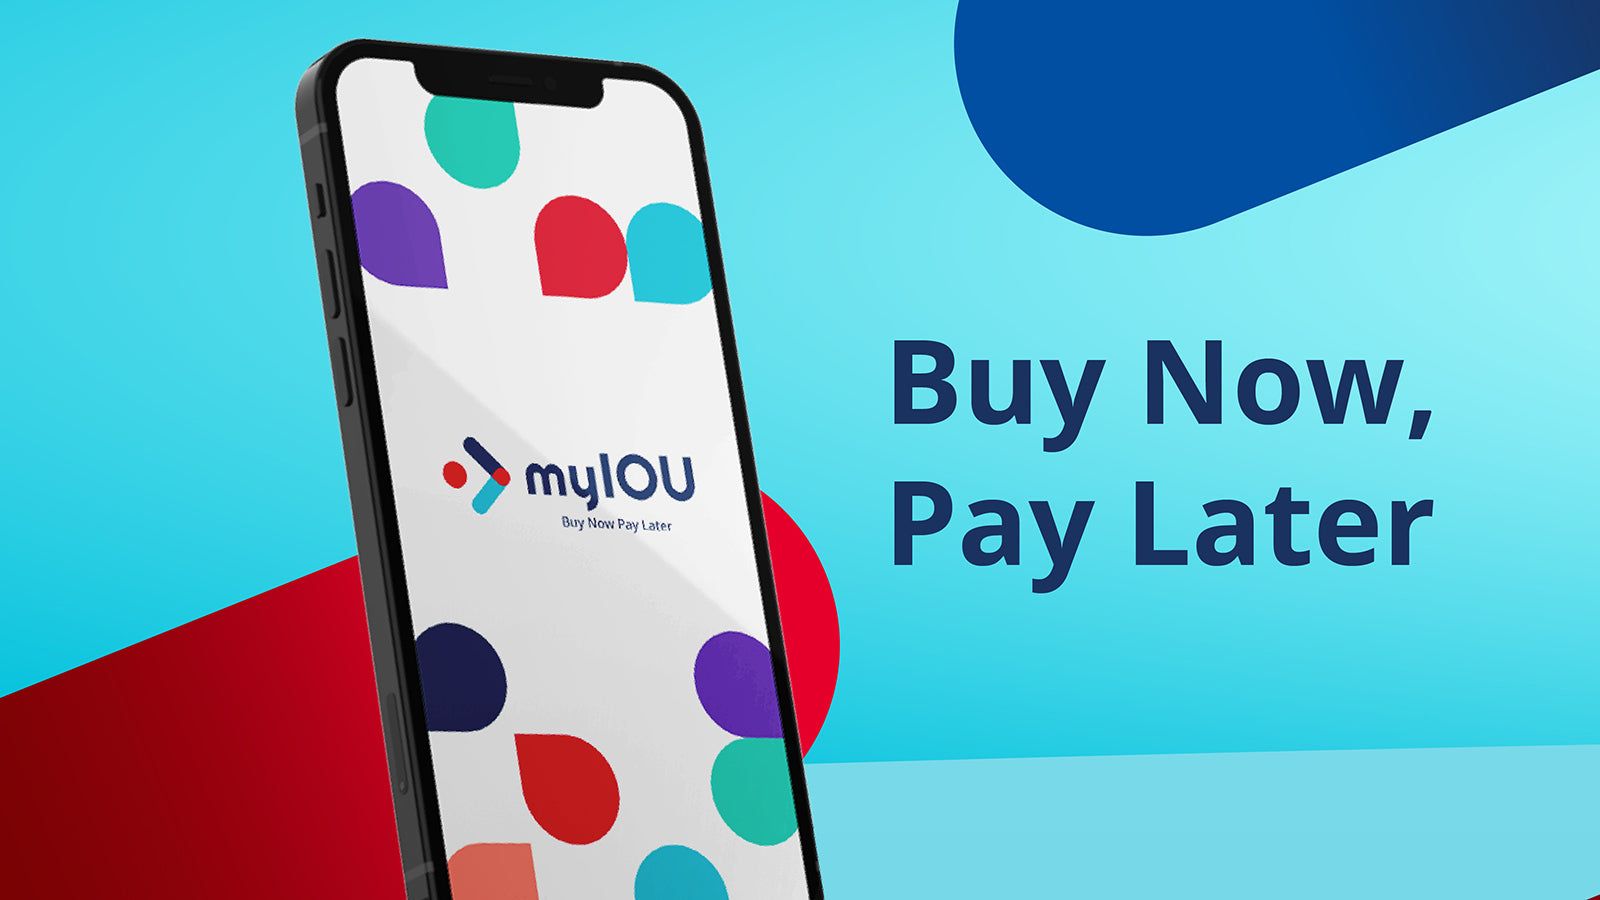 myIOU Buy Now Pay Later